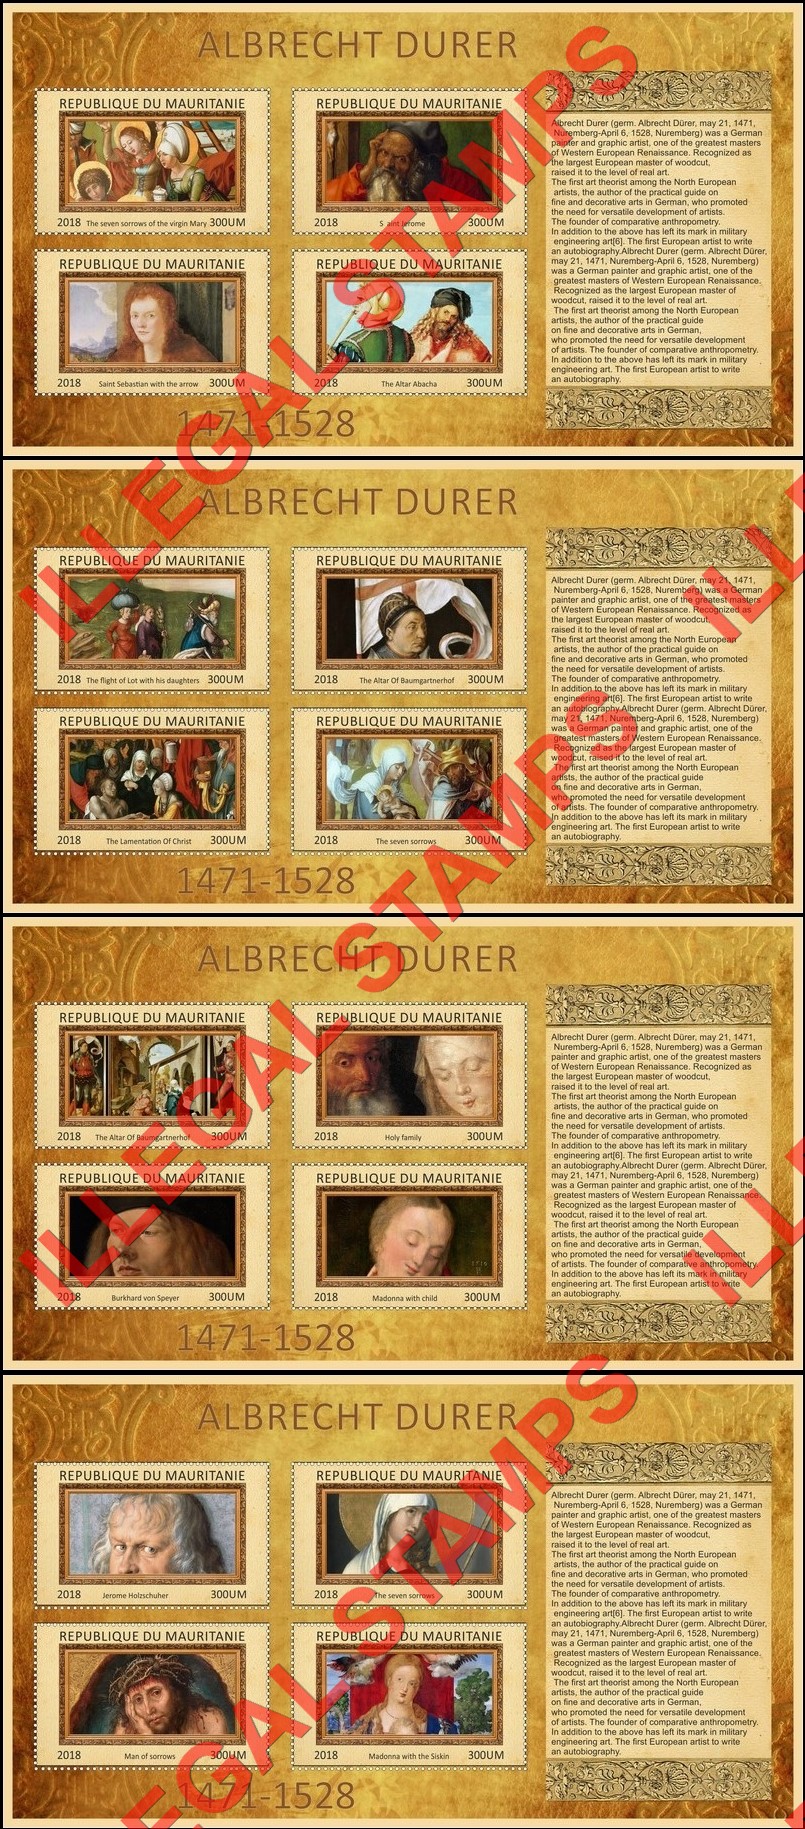 MAURITANIA 2018 Paintings by Albrecht Durer Illegal Stamp Souvenir Sheets of 4